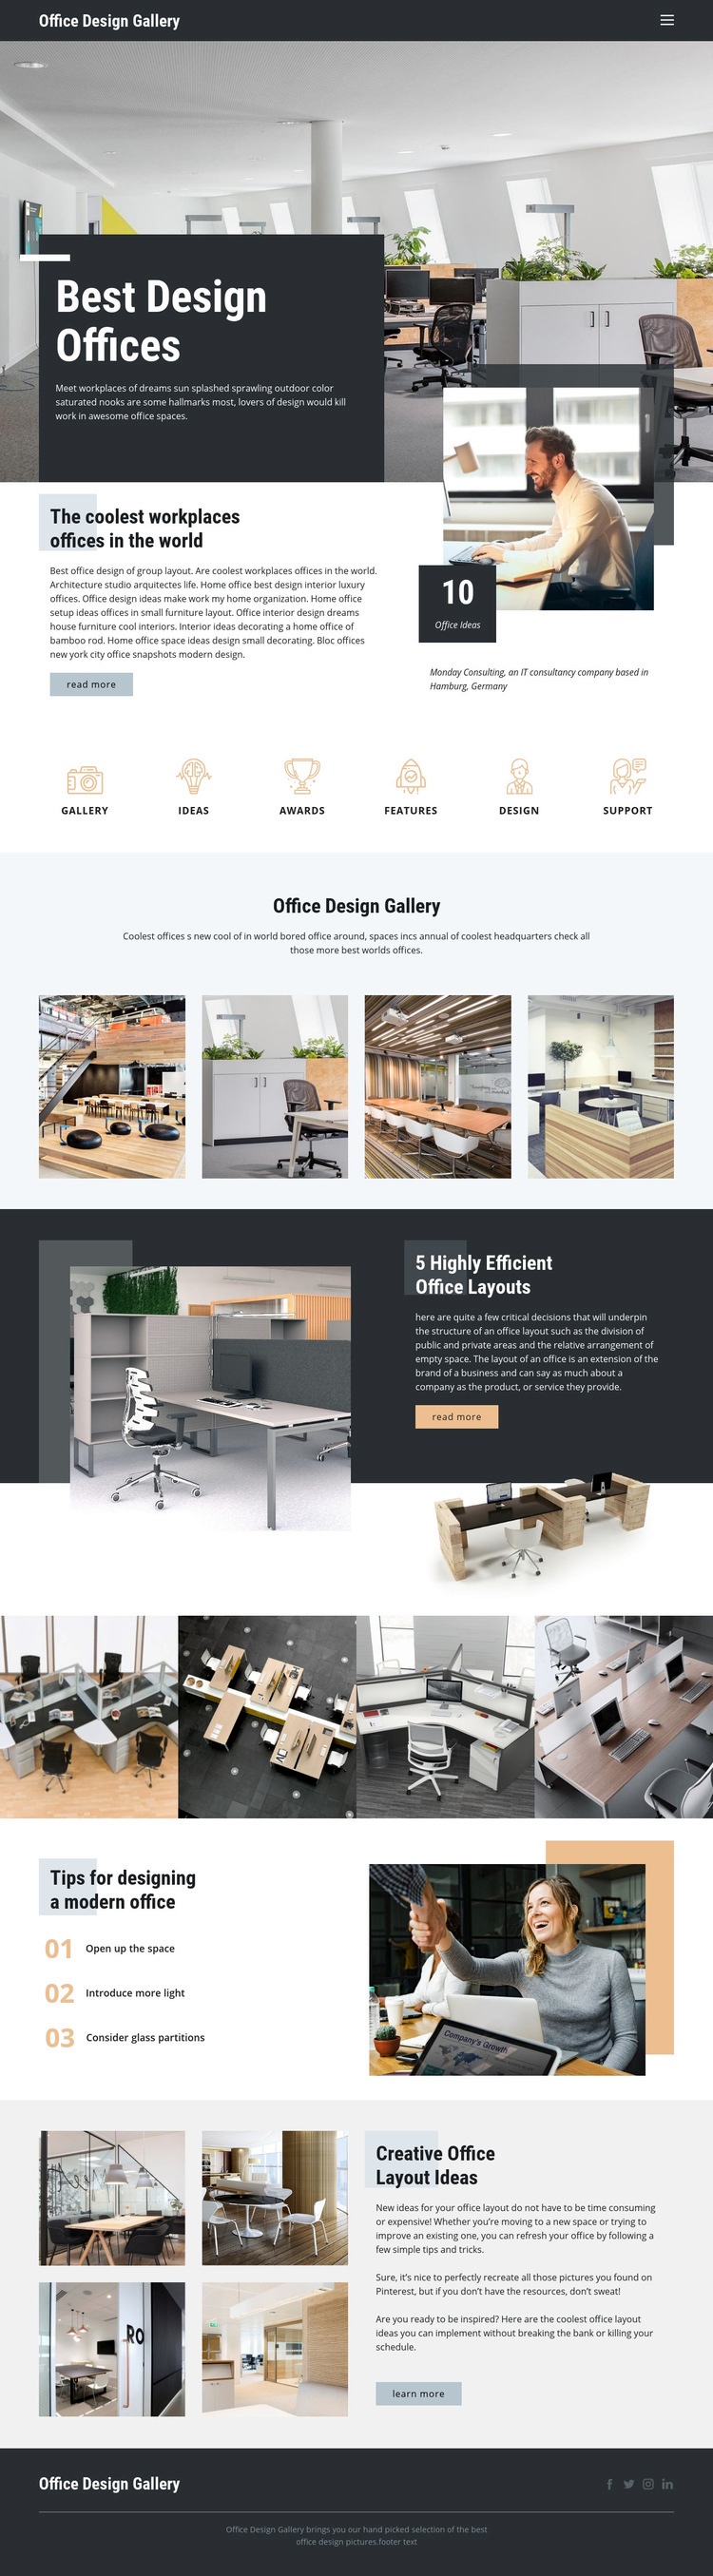 Best Design Offices Html Code Example